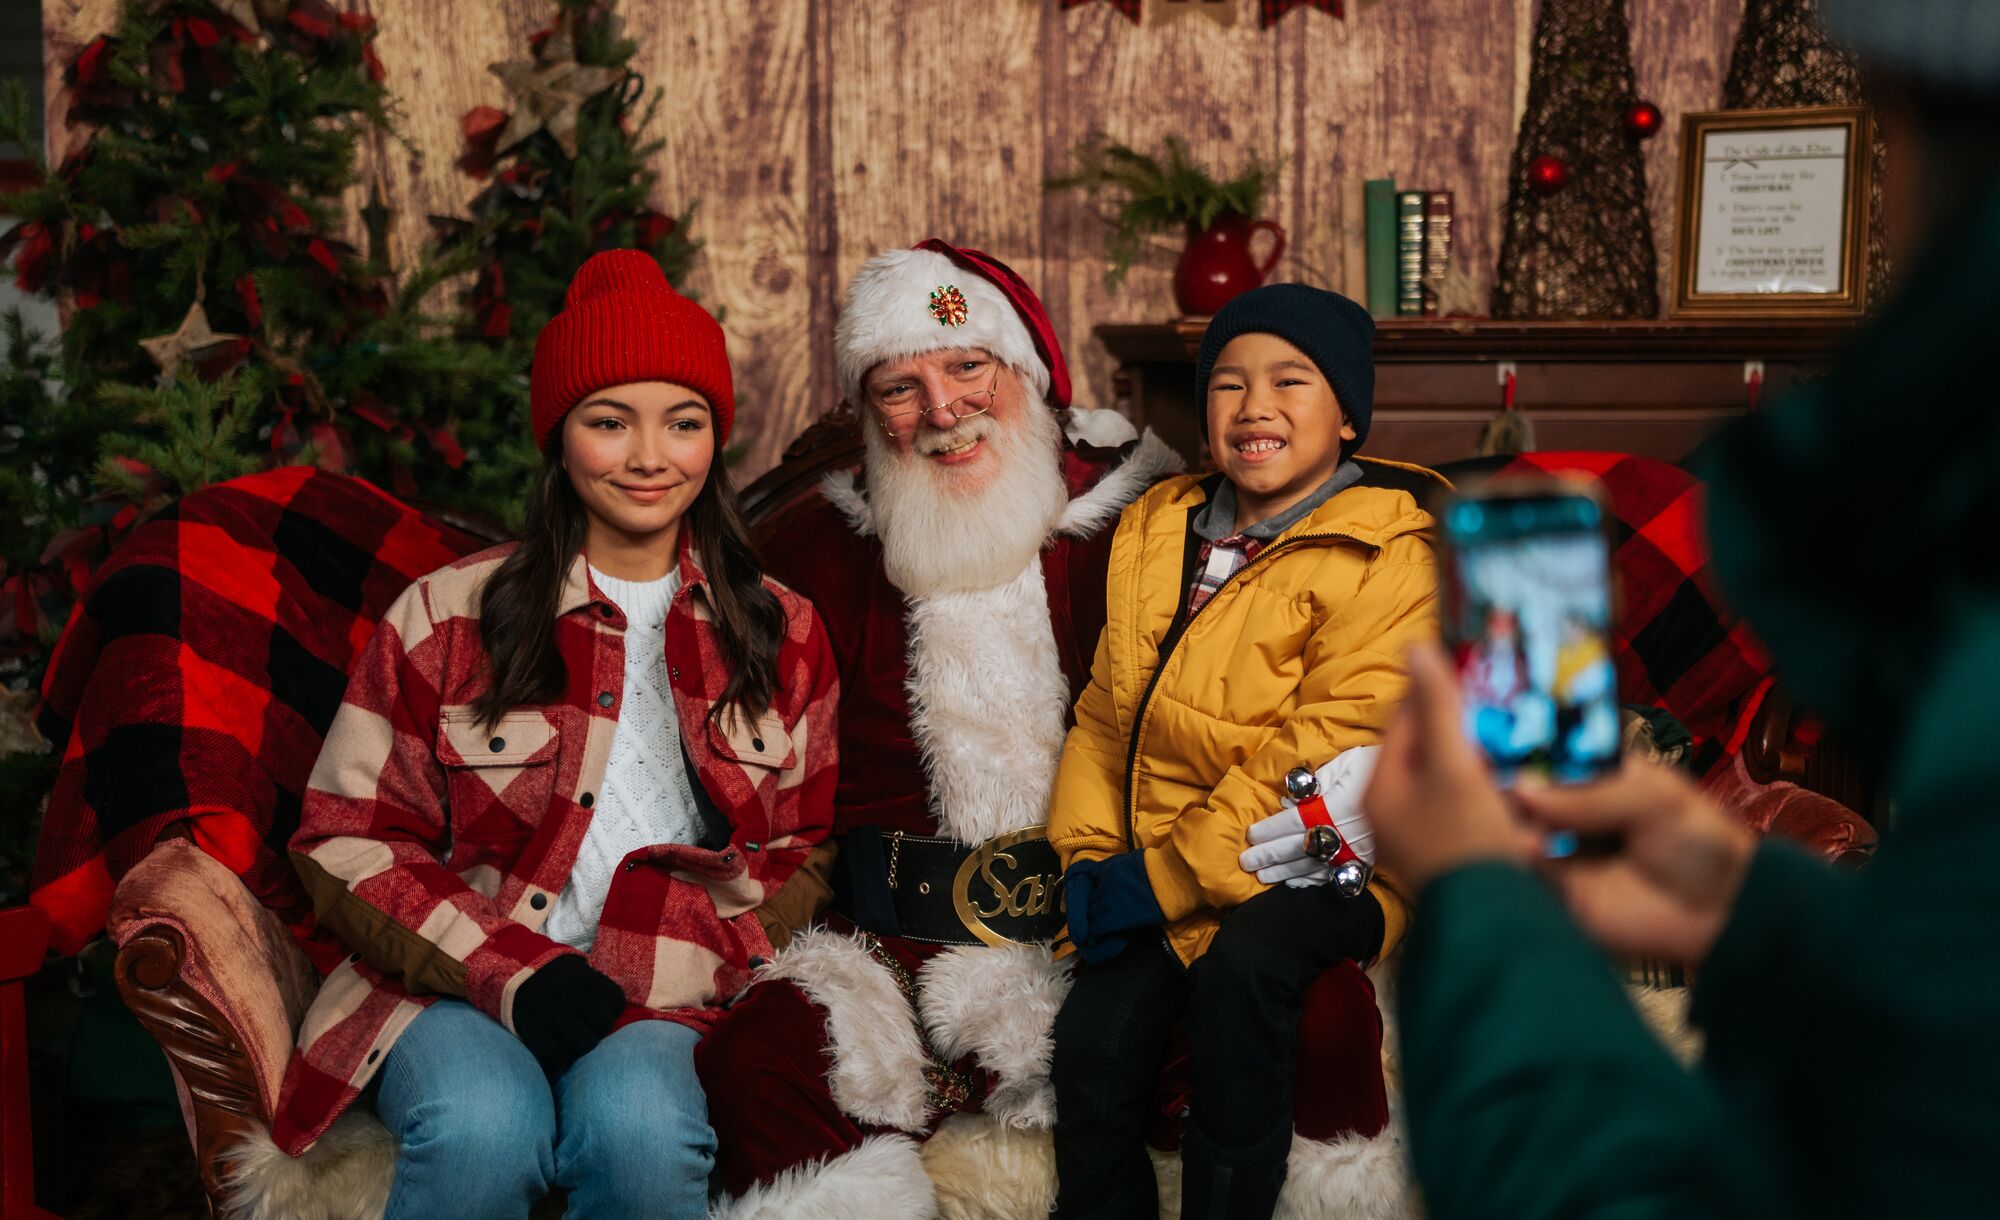 Two kids meet Santa Clause at the Banff Christmas Market during Christmas in Banff.